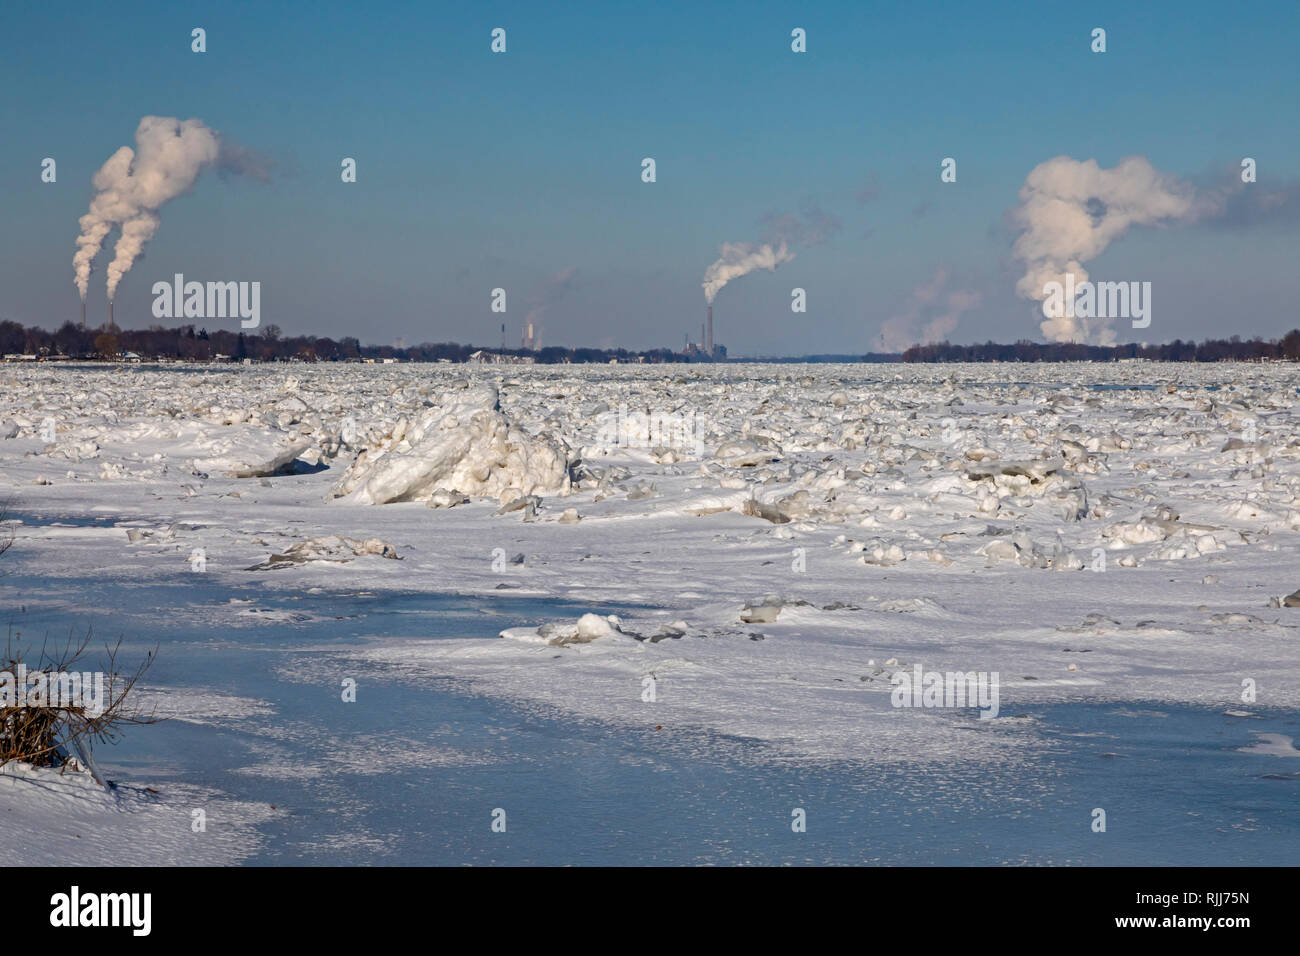 Marine City, Michigan - DTE Energy coal-fired power plants line the U.S. side (left) of the ice-filled St. Clair River. The Canadian side has mostly r Stock Photo